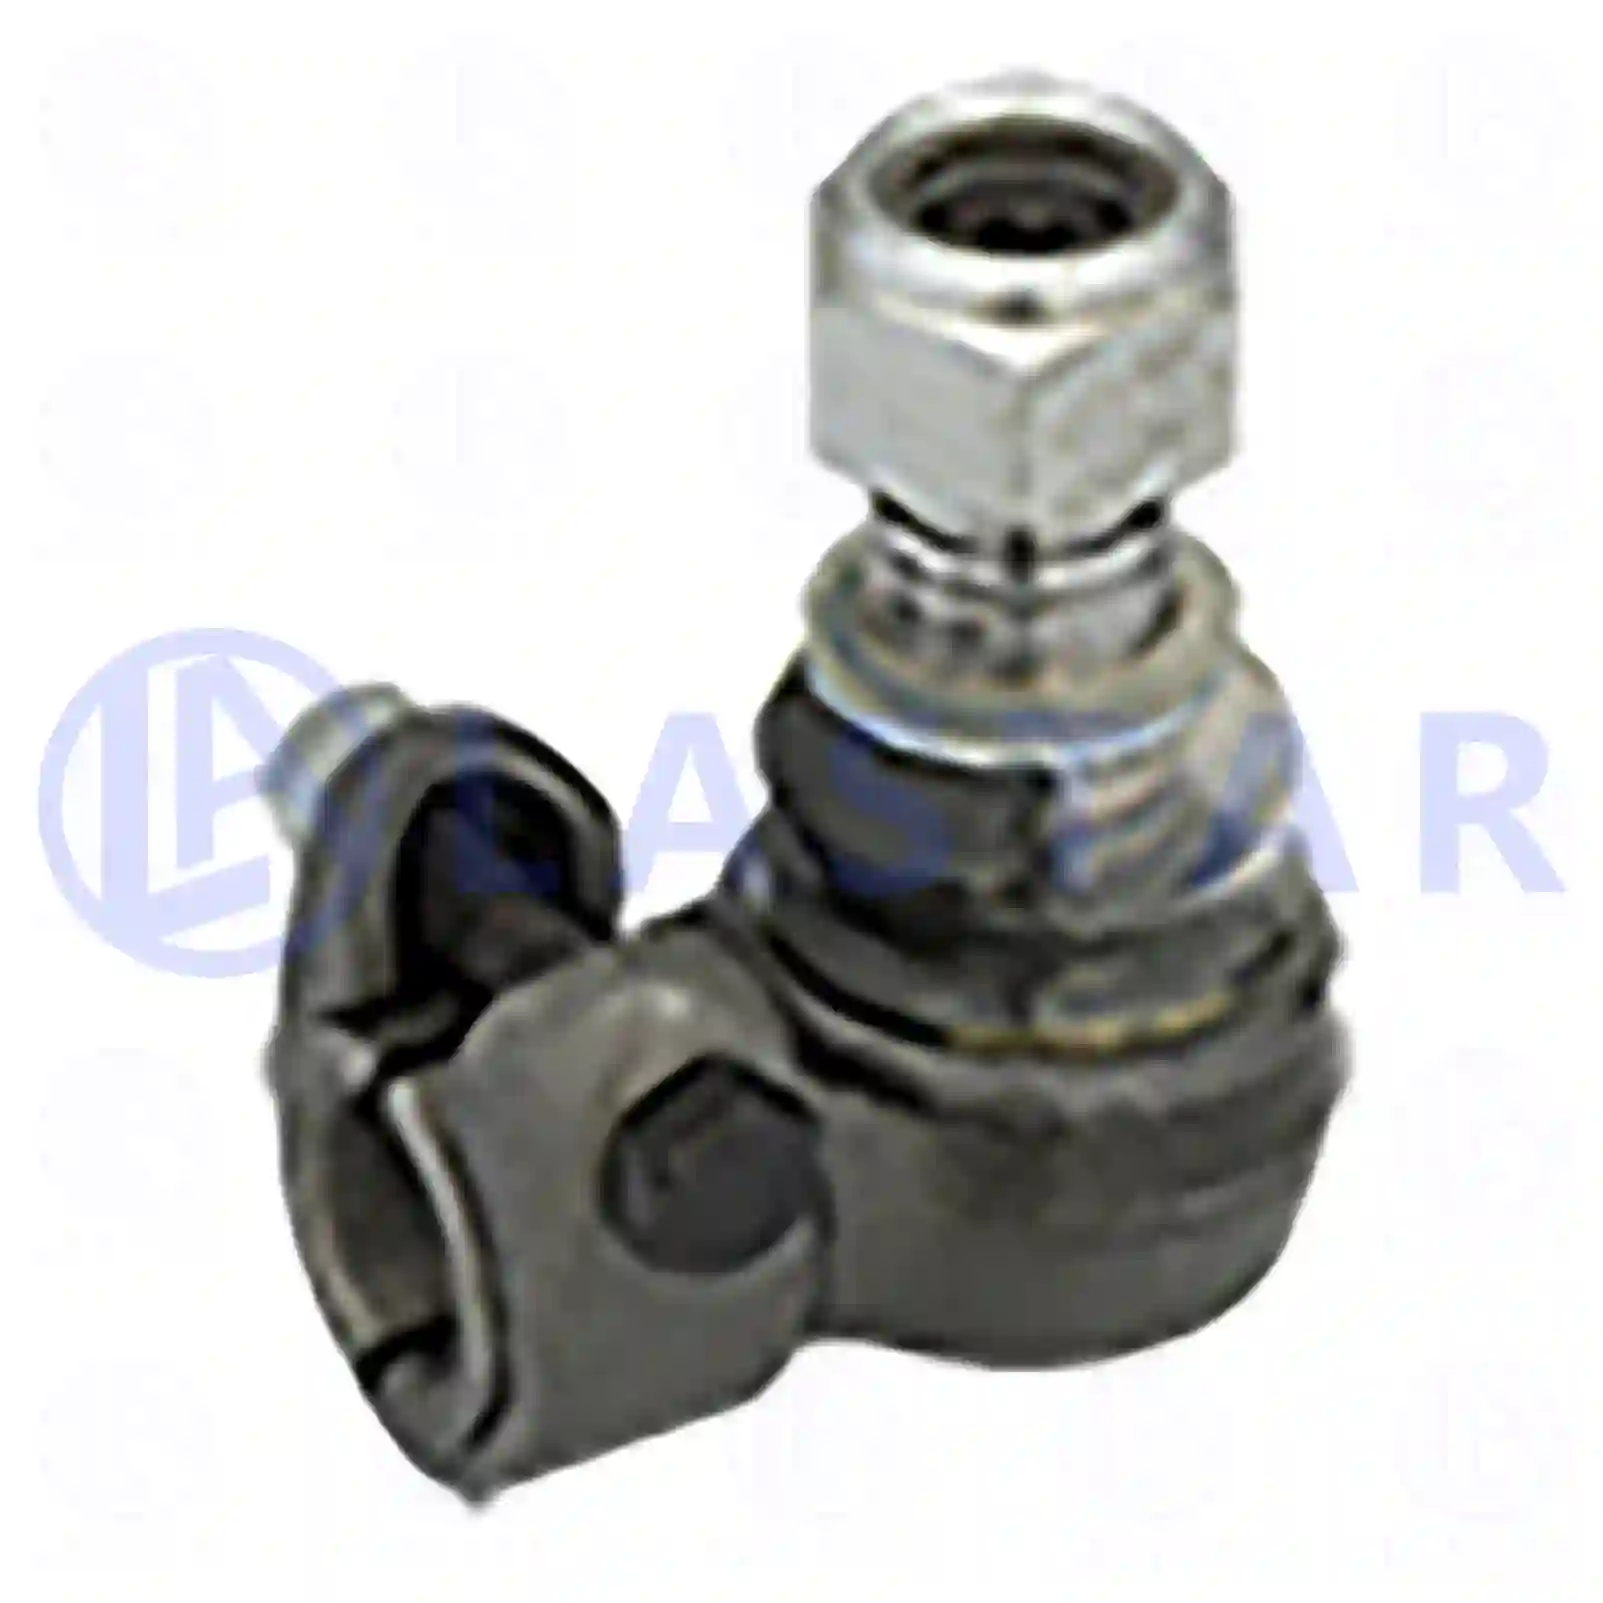 Drag Link Ball joint, right hand thread, la no: 77705116 ,  oem no:1271126, 42530447, 42538048, 81953016268, 82953016018, 82953016019, 281953016268, 3090291, 3099128, ZG40379-0008 Lastar Spare Part | Truck Spare Parts, Auotomotive Spare Parts